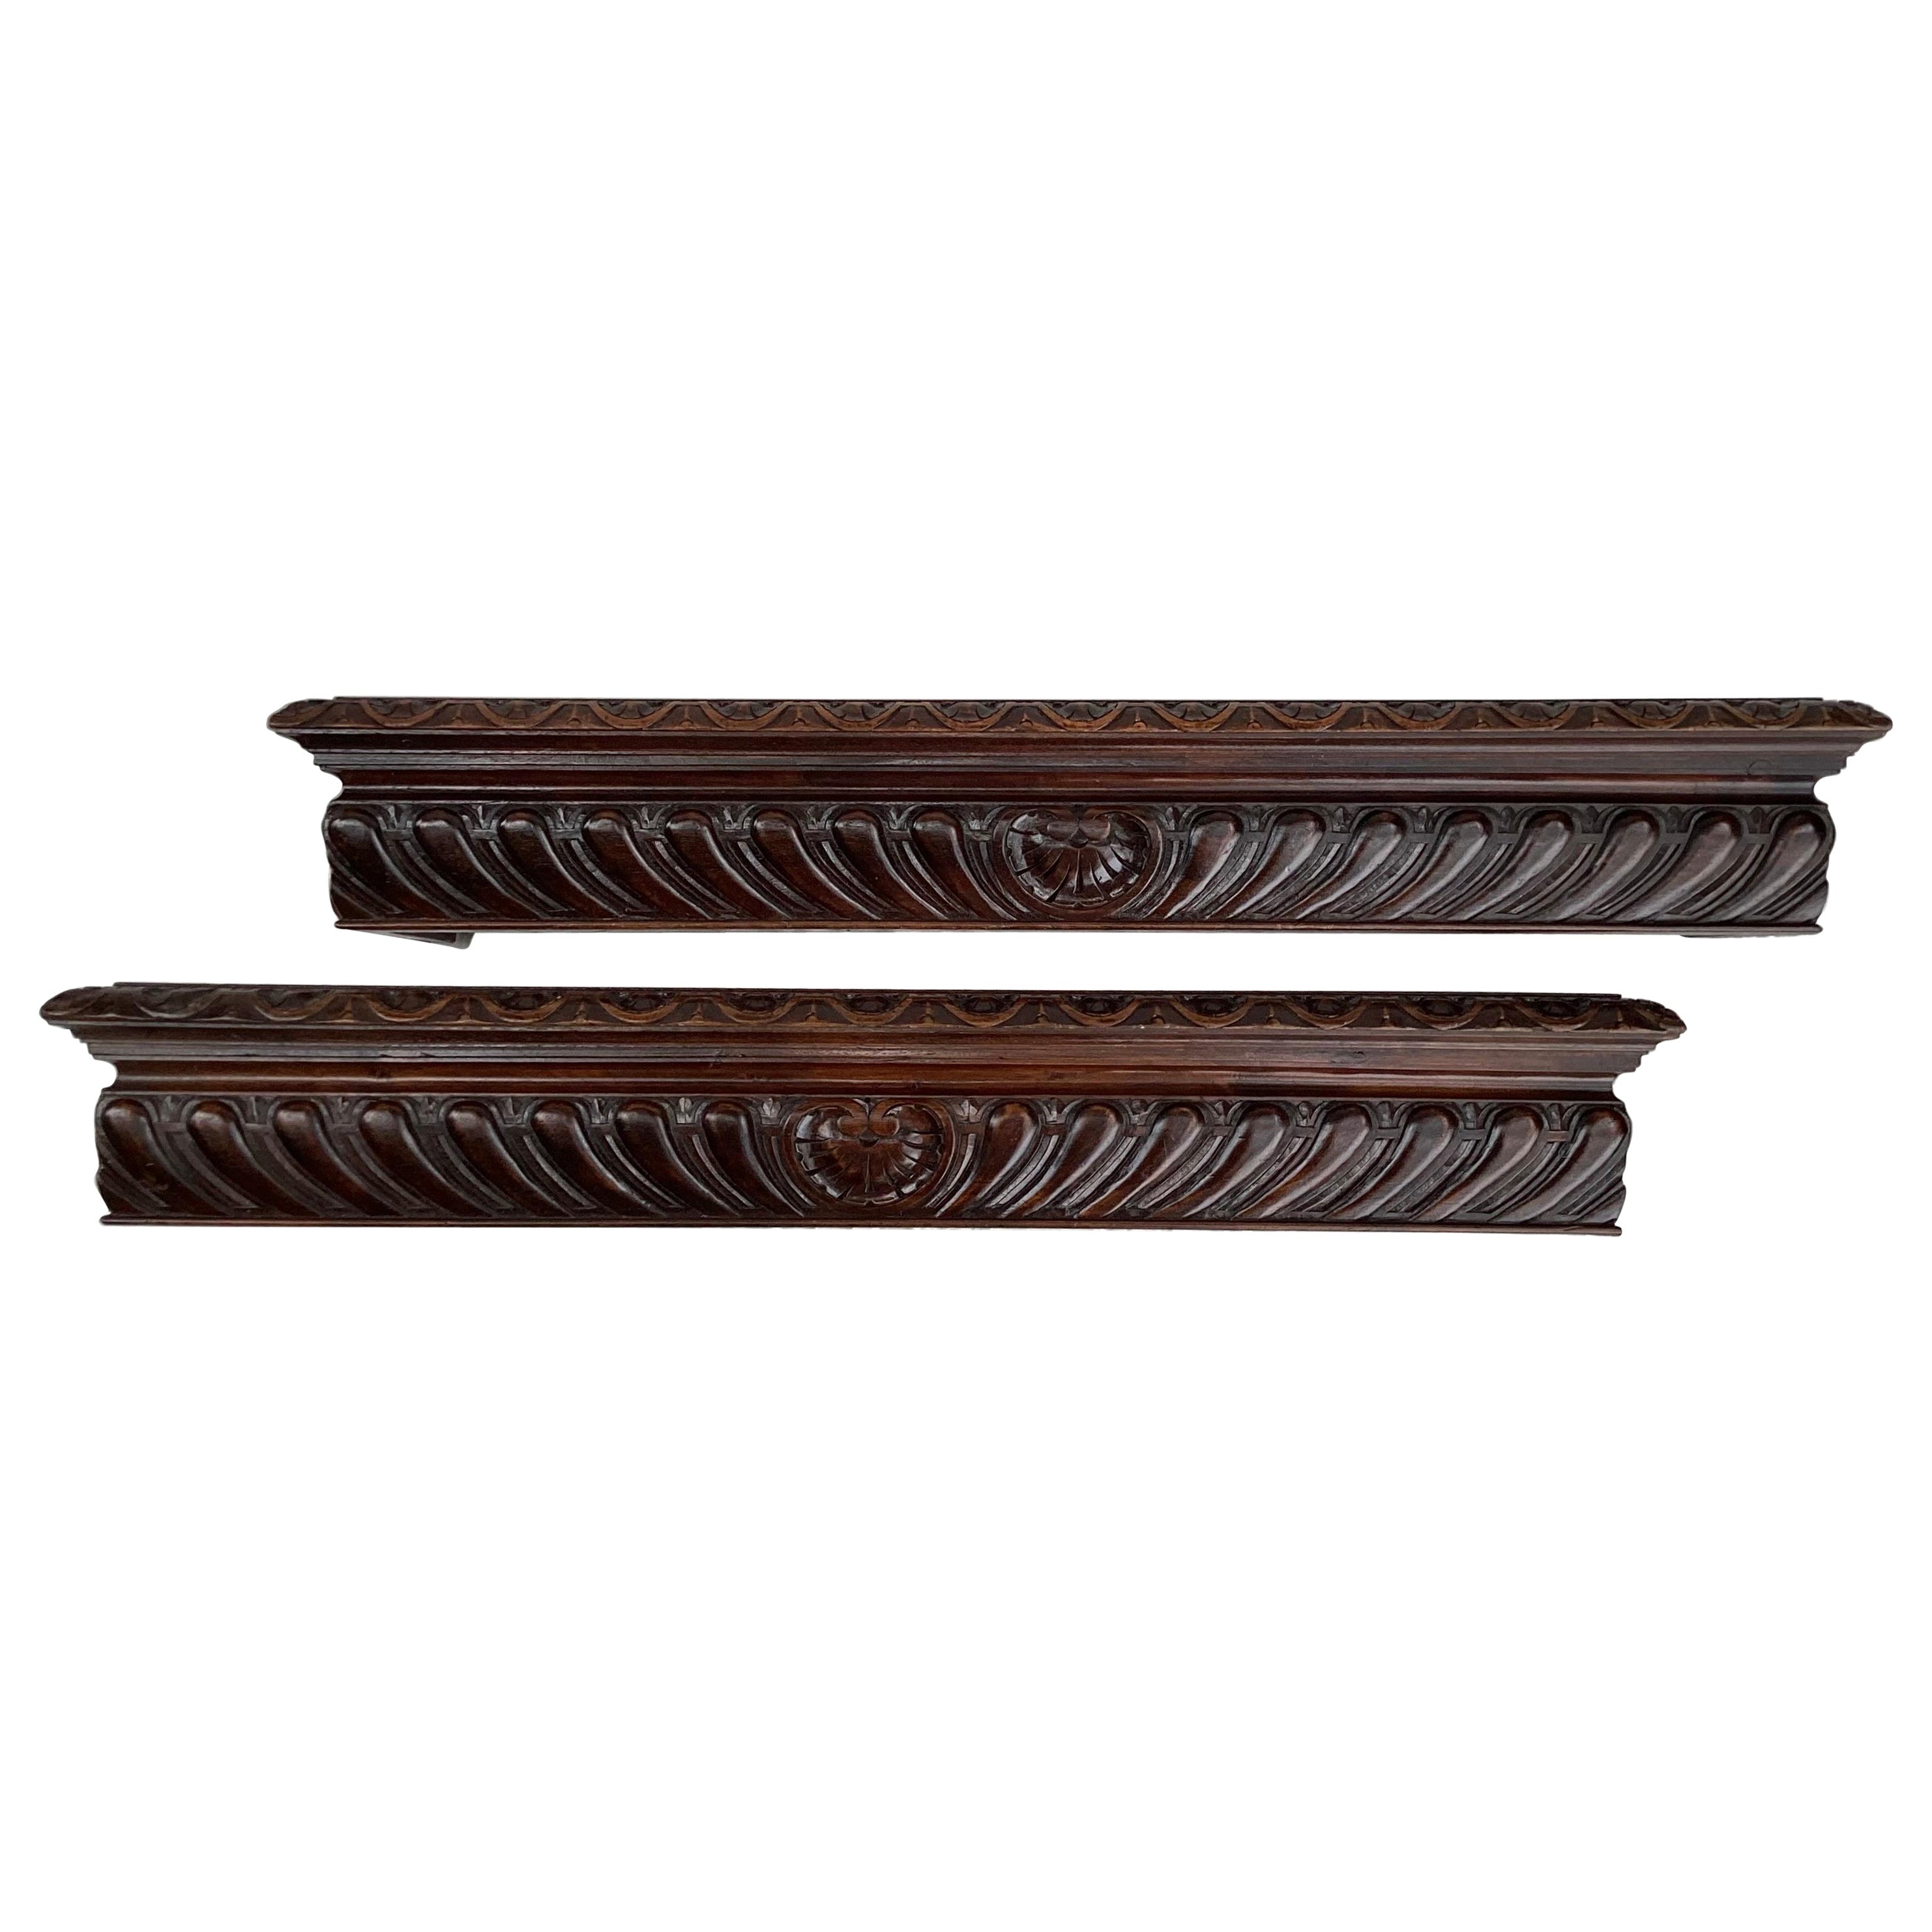 Get Pair of Carved Wood Window Cornices or Window Valances For Sale